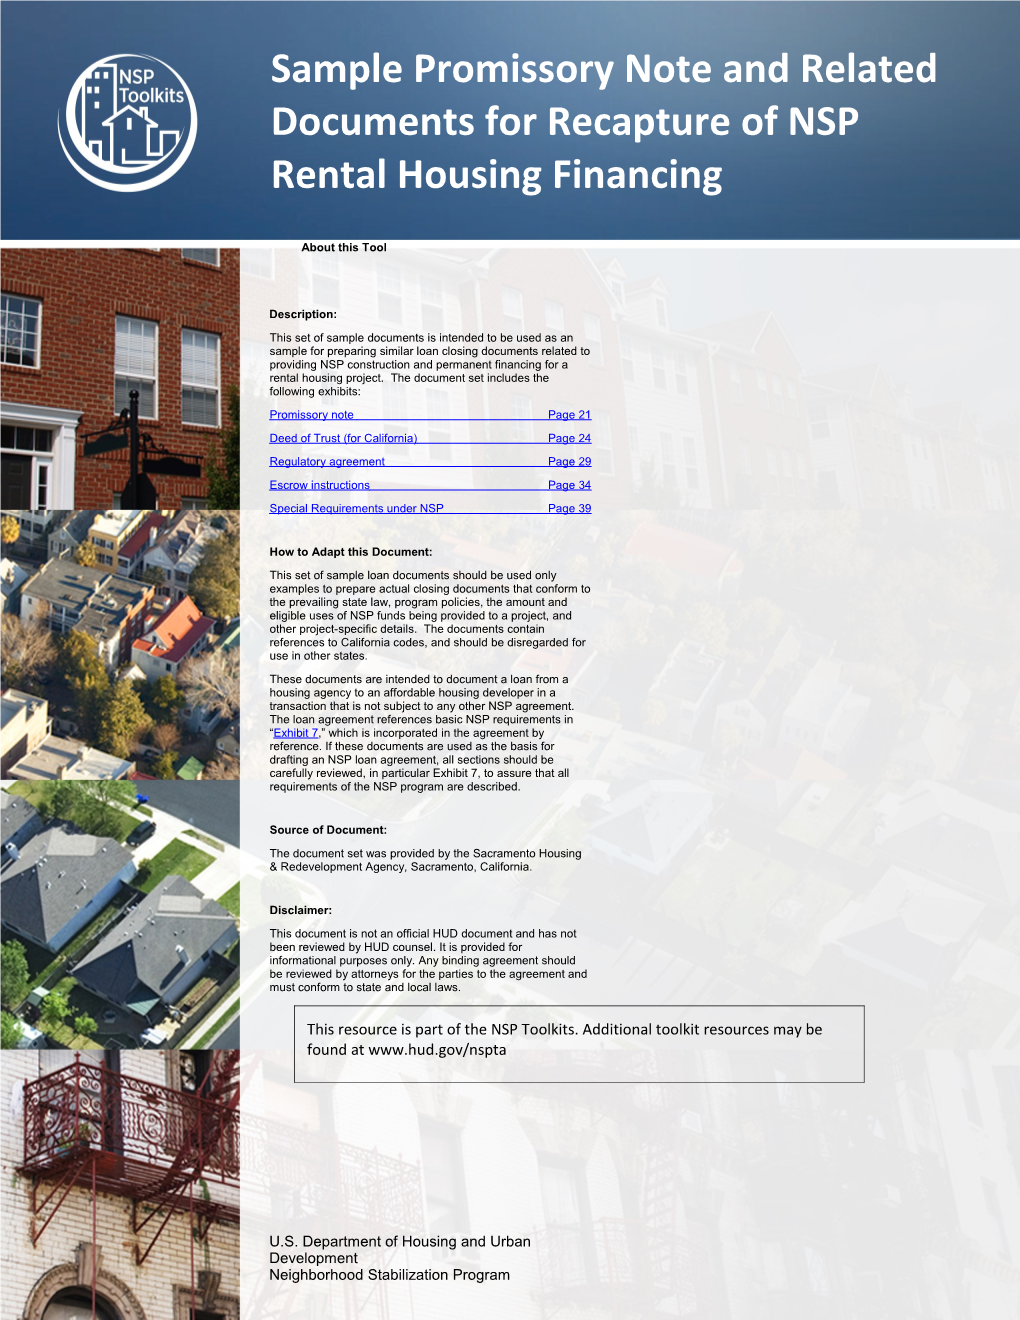 Sample Promissory Note and Related Documents for Recapture of NSP Rental Housing Financing